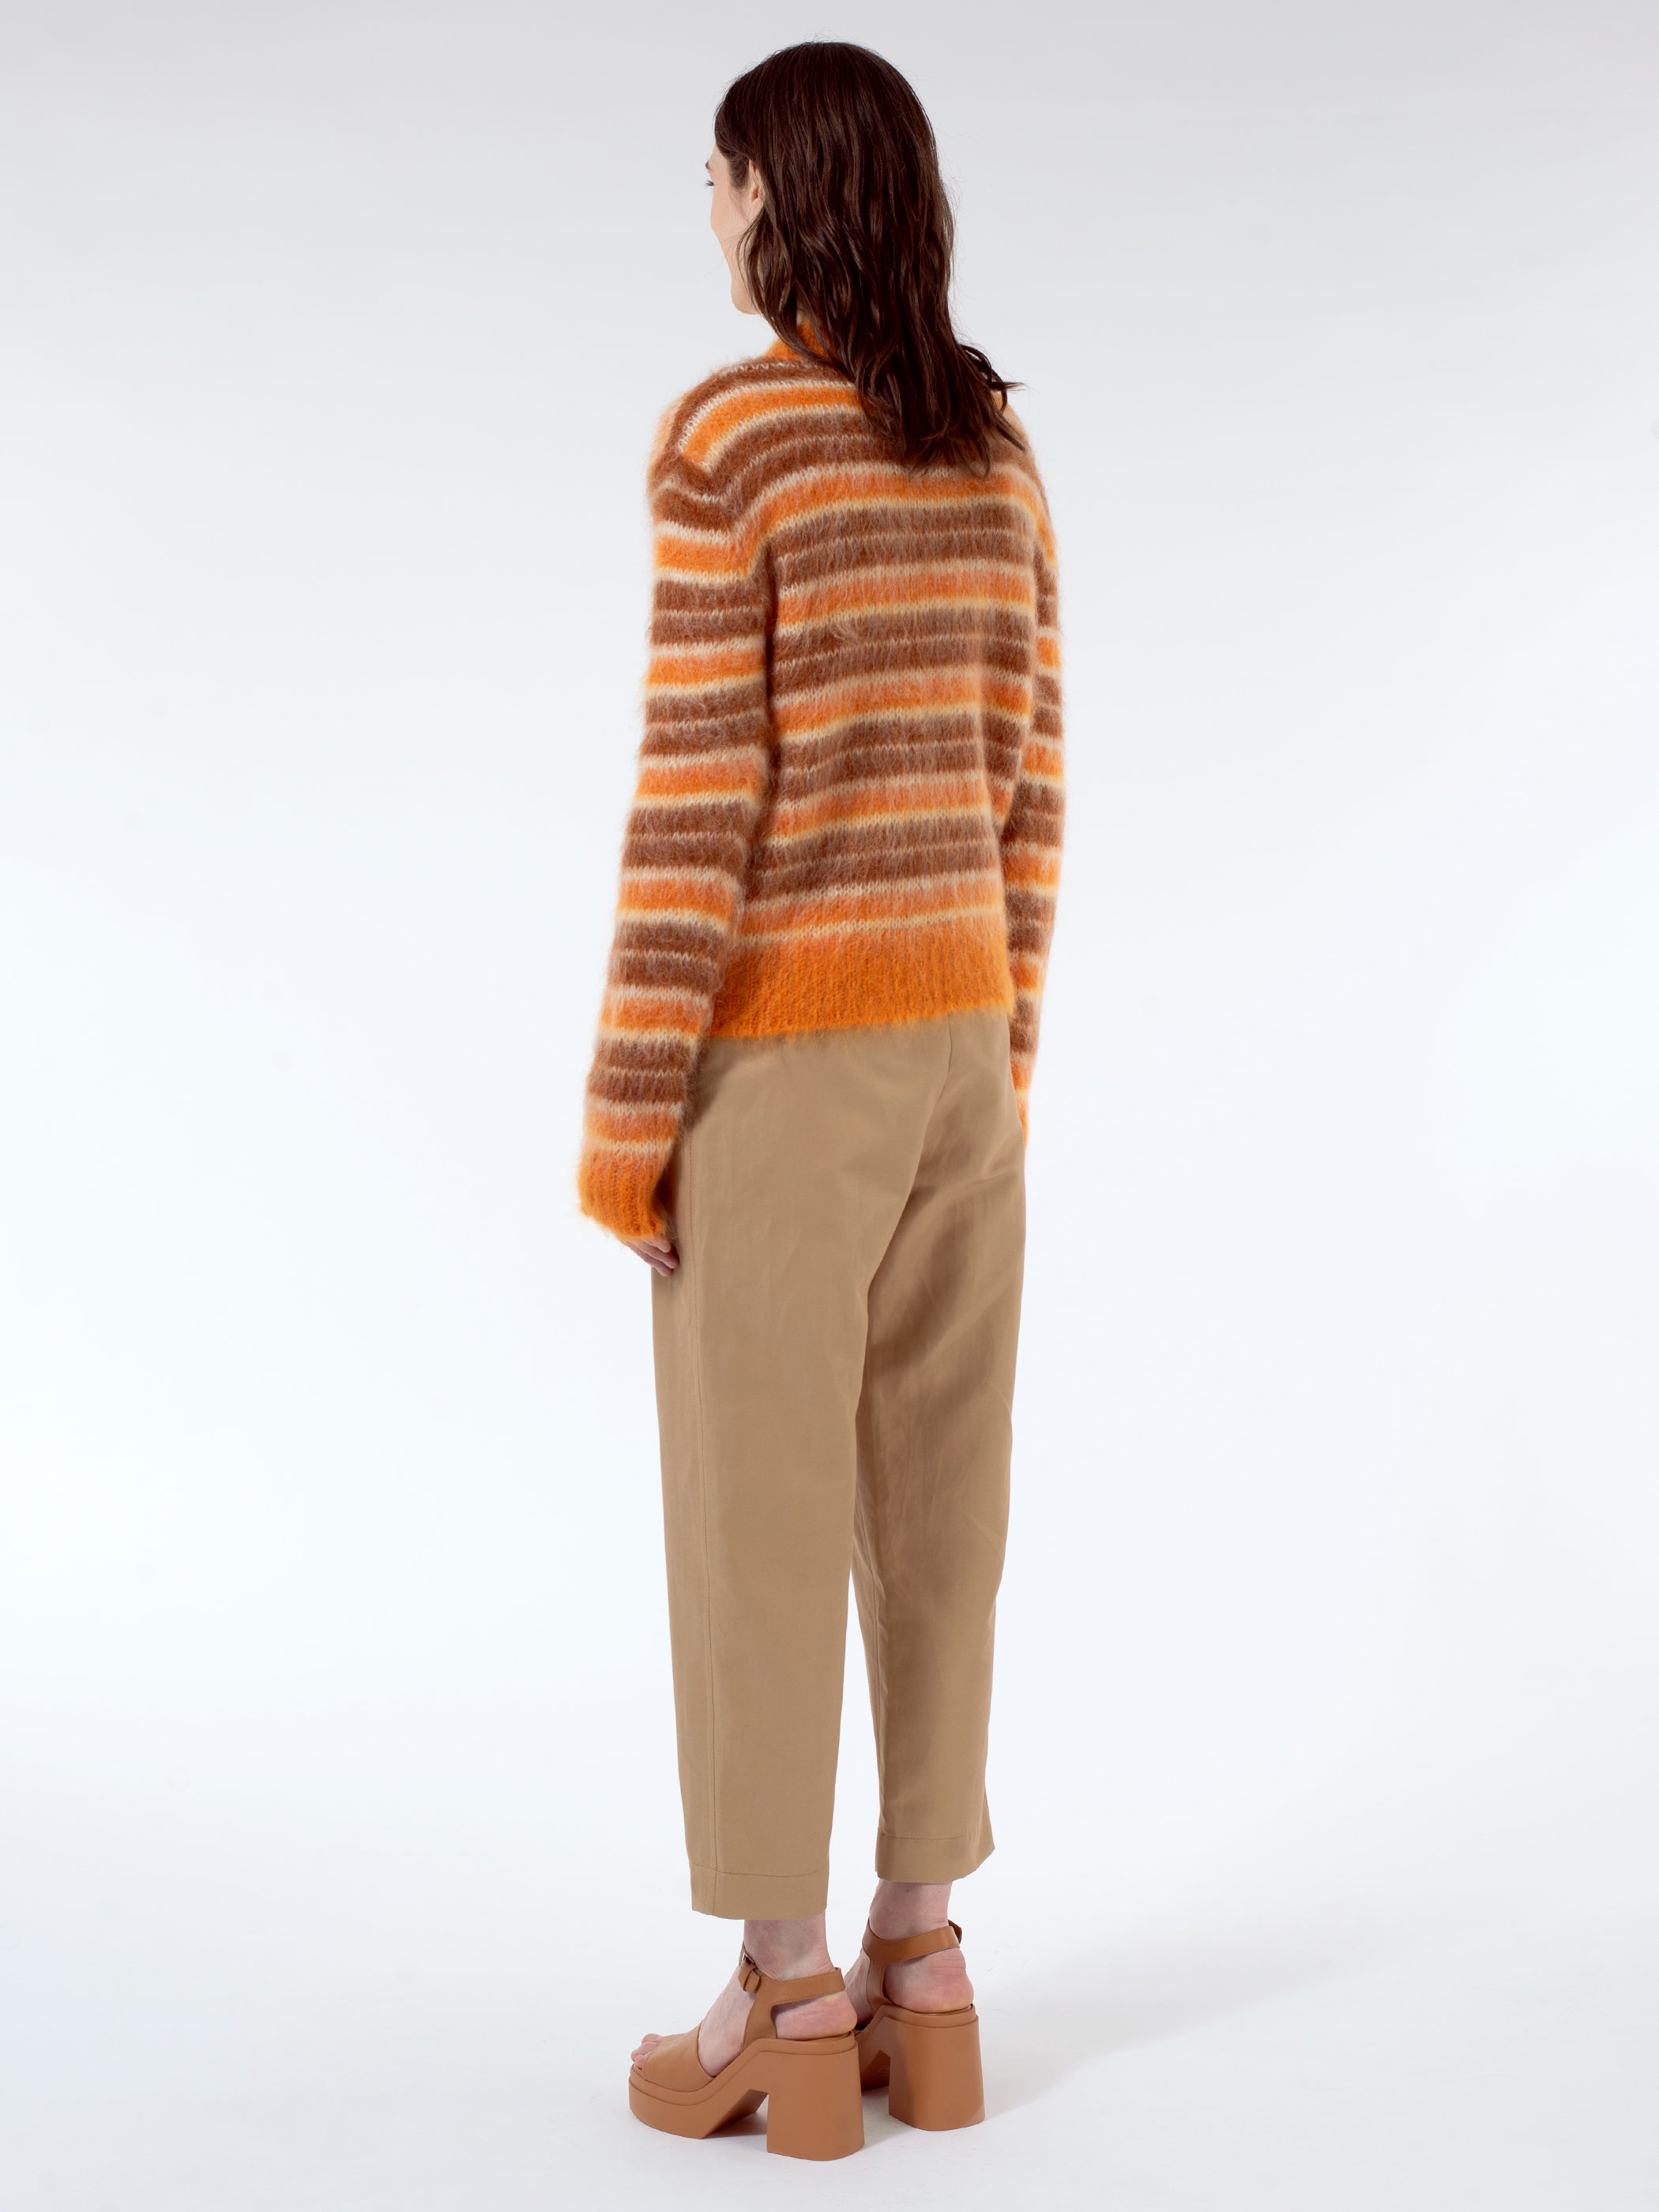 Marni - Striped Mohair and Wool Sweater in Quartz – gravitypope